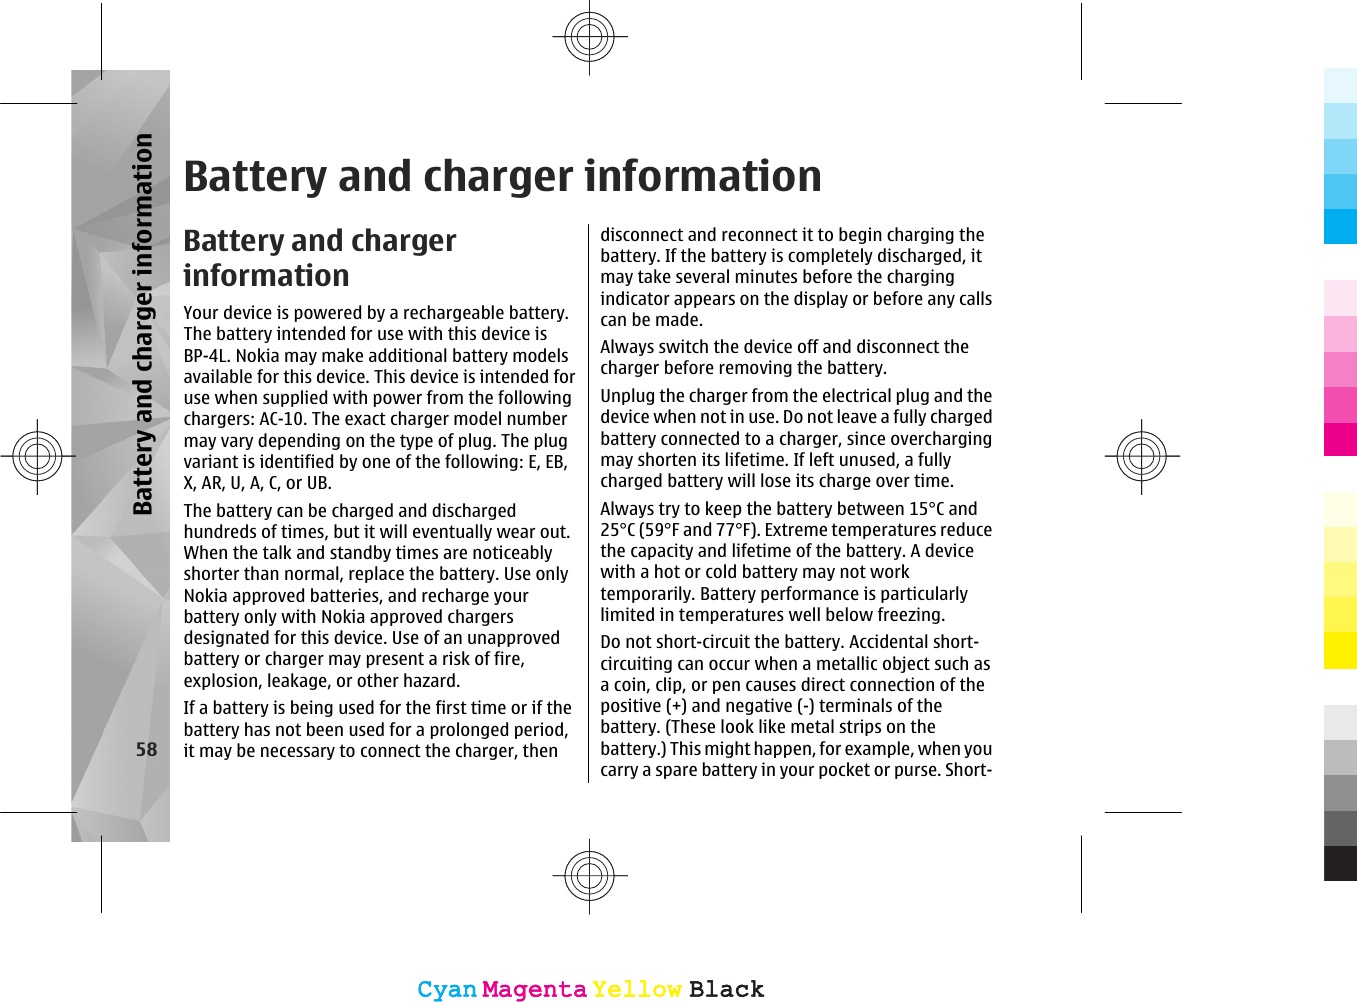 Battery and charger informationBattery and chargerinformationYour device is powered by a rechargeable battery.The battery intended for use with this device isBP-4L. Nokia may make additional battery modelsavailable for this device. This device is intended foruse when supplied with power from the followingchargers: AC-10. The exact charger model numbermay vary depending on the type of plug. The plugvariant is identified by one of the following: E, EB,X, AR, U, A, C, or UB.The battery can be charged and dischargedhundreds of times, but it will eventually wear out.When the talk and standby times are noticeablyshorter than normal, replace the battery. Use onlyNokia approved batteries, and recharge yourbattery only with Nokia approved chargersdesignated for this device. Use of an unapprovedbattery or charger may present a risk of fire,explosion, leakage, or other hazard.If a battery is being used for the first time or if thebattery has not been used for a prolonged period,it may be necessary to connect the charger, thendisconnect and reconnect it to begin charging thebattery. If the battery is completely discharged, itmay take several minutes before the chargingindicator appears on the display or before any callscan be made.Always switch the device off and disconnect thecharger before removing the battery.Unplug the charger from the electrical plug and thedevice when not in use. Do not leave a fully chargedbattery connected to a charger, since overchargingmay shorten its lifetime. If left unused, a fullycharged battery will lose its charge over time.Always try to keep the battery between 15°C and25°C (59°F and 77°F). Extreme temperatures reducethe capacity and lifetime of the battery. A devicewith a hot or cold battery may not worktemporarily. Battery performance is particularlylimited in temperatures well below freezing.Do not short-circuit the battery. Accidental short-circuiting can occur when a metallic object such asa coin, clip, or pen causes direct connection of thepositive (+) and negative (-) terminals of thebattery. (These look like metal strips on thebattery.) This might happen, for example, when youcarry a spare battery in your pocket or purse. Short-58Battery and charger informationCyanCyanMagentaMagentaYellowYellowBlackBlackCyanCyanMagentaMagentaYellowYellowBlackBlack